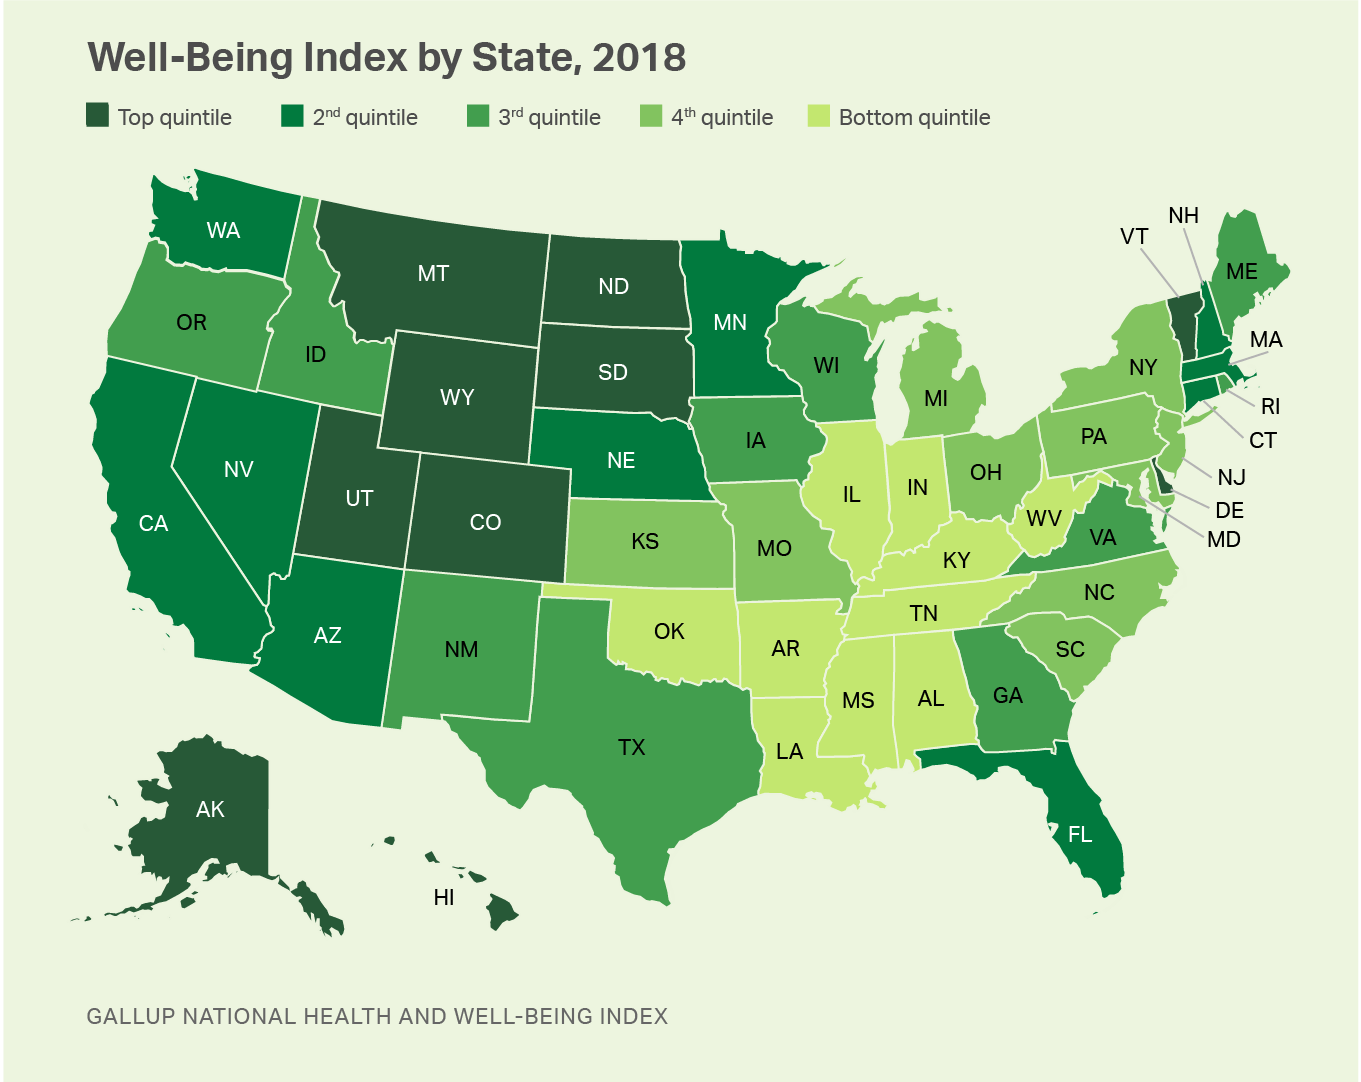 Heat Map. Gallup Well-Being Index scores by state, 2018.